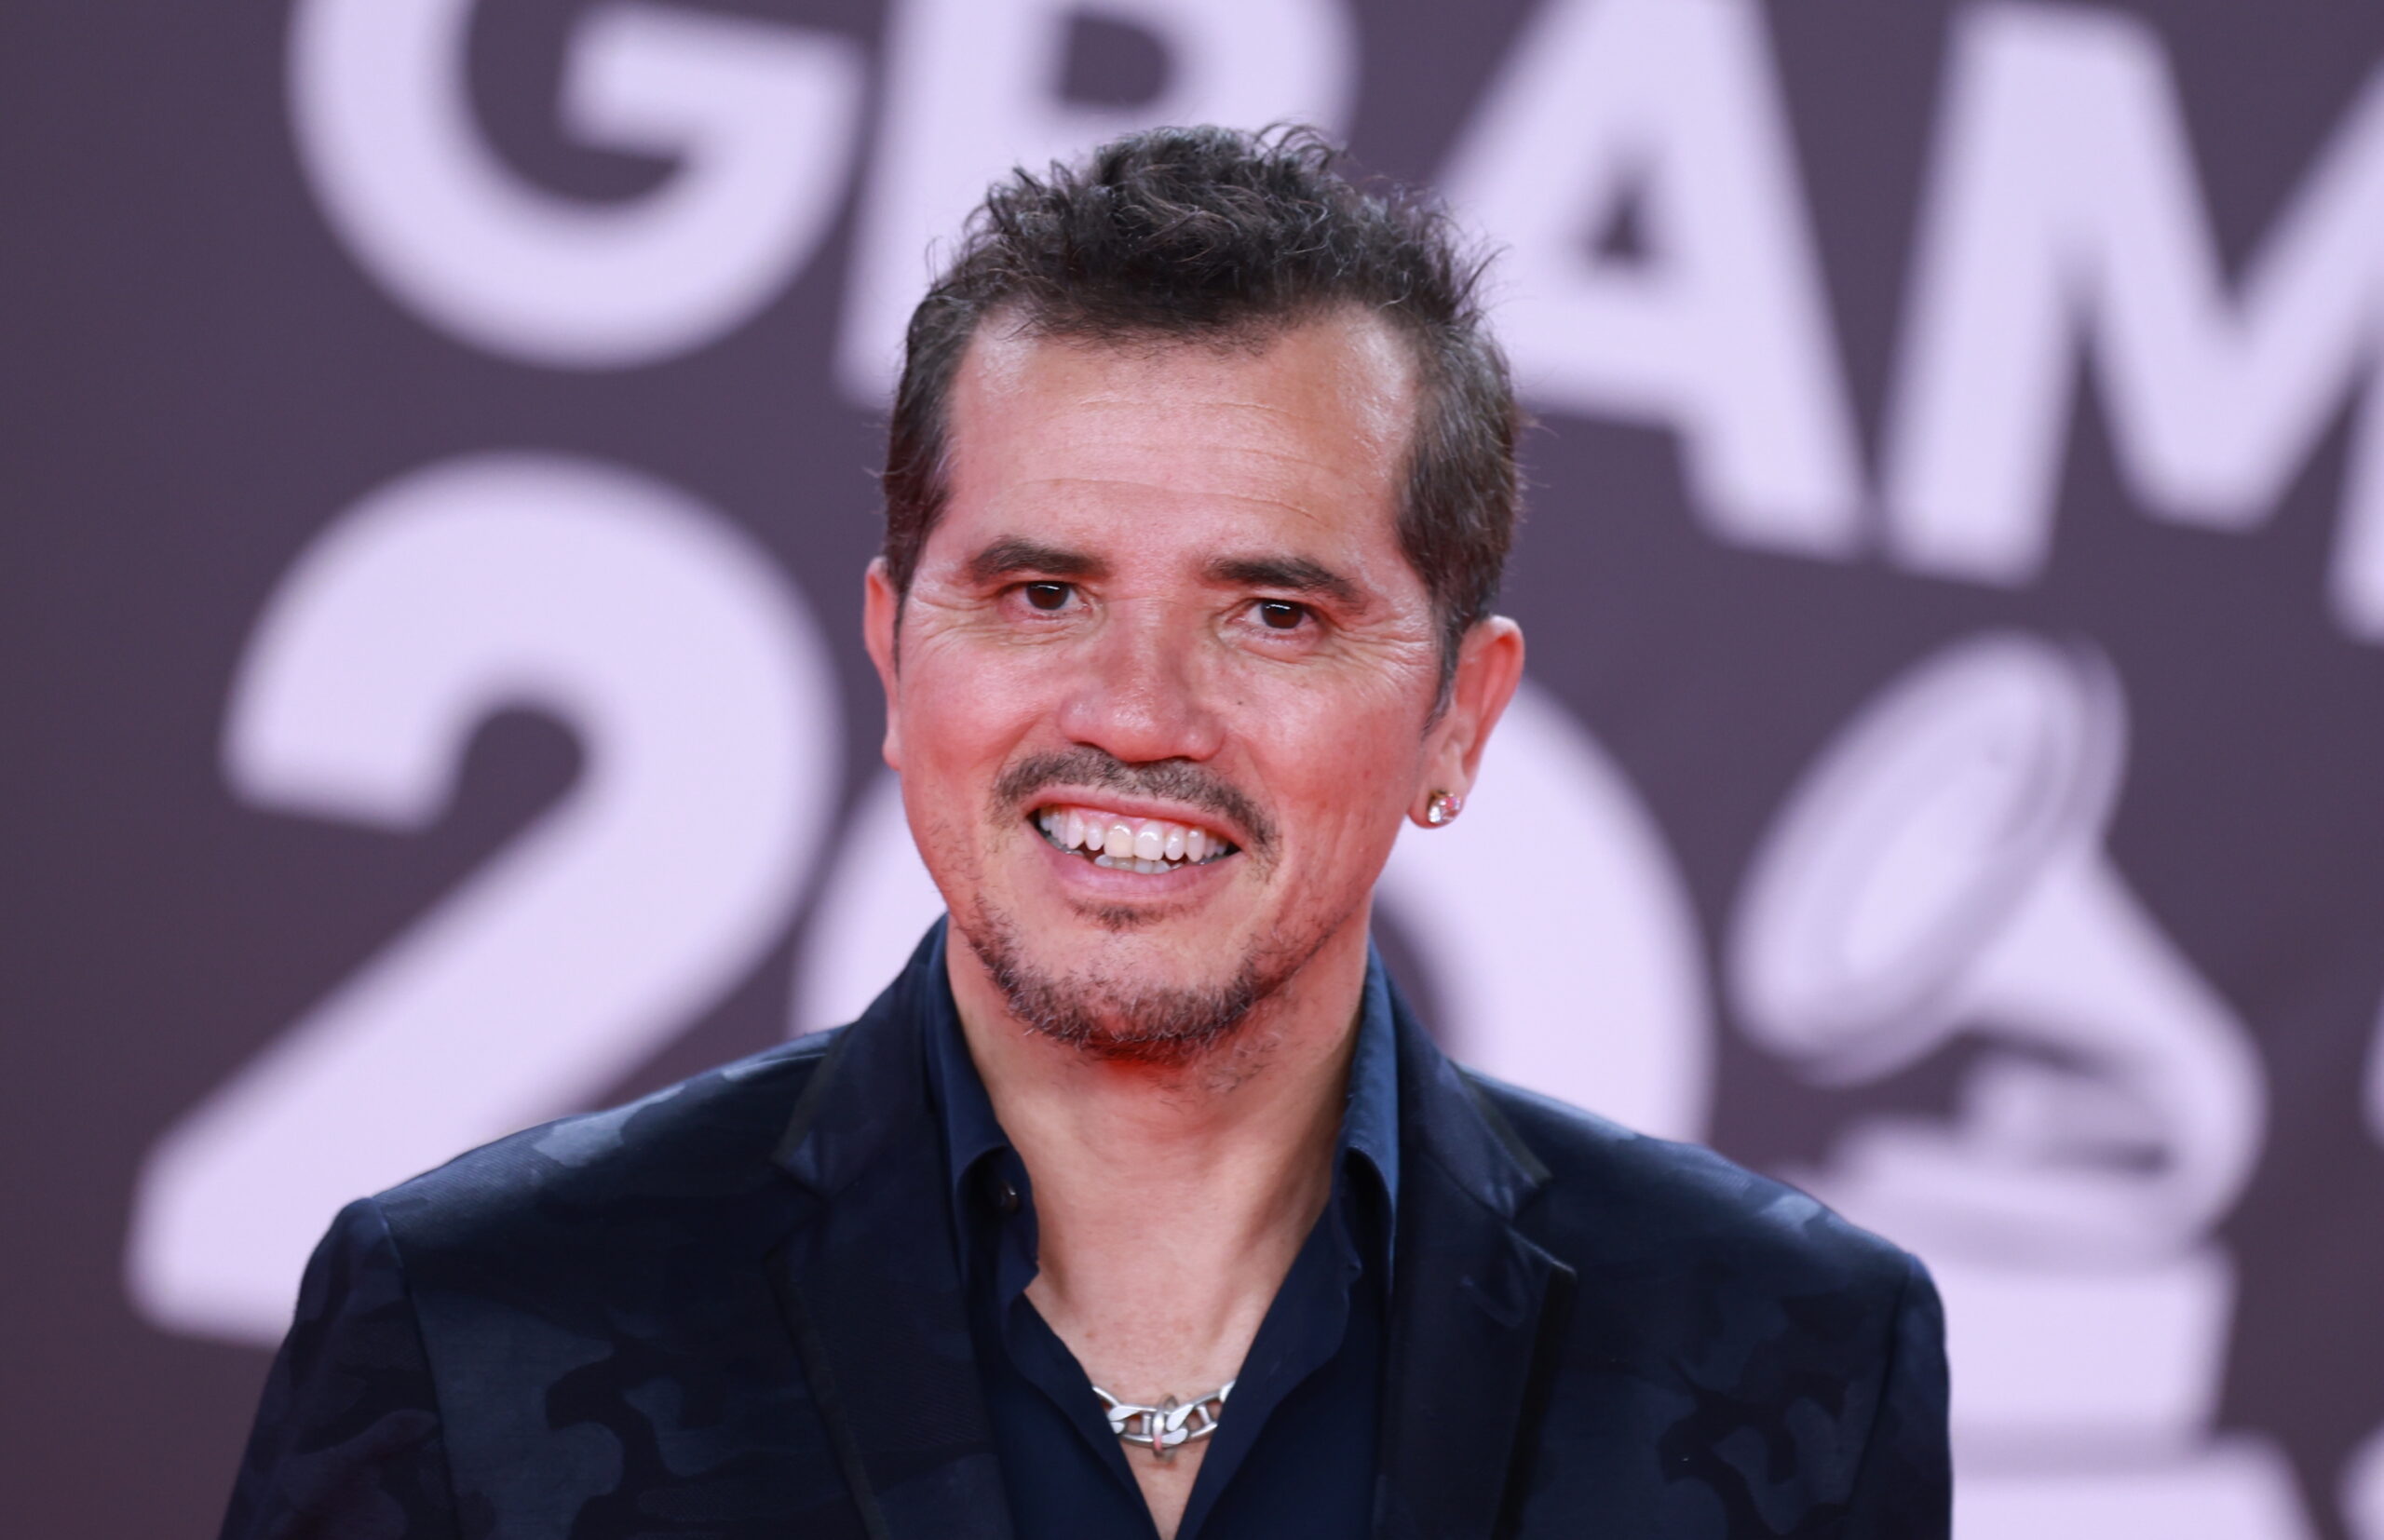 John Leguizamo Calls for Emmy Nominations for ‘Non-White Artists’ in NYT Full-Page Ad